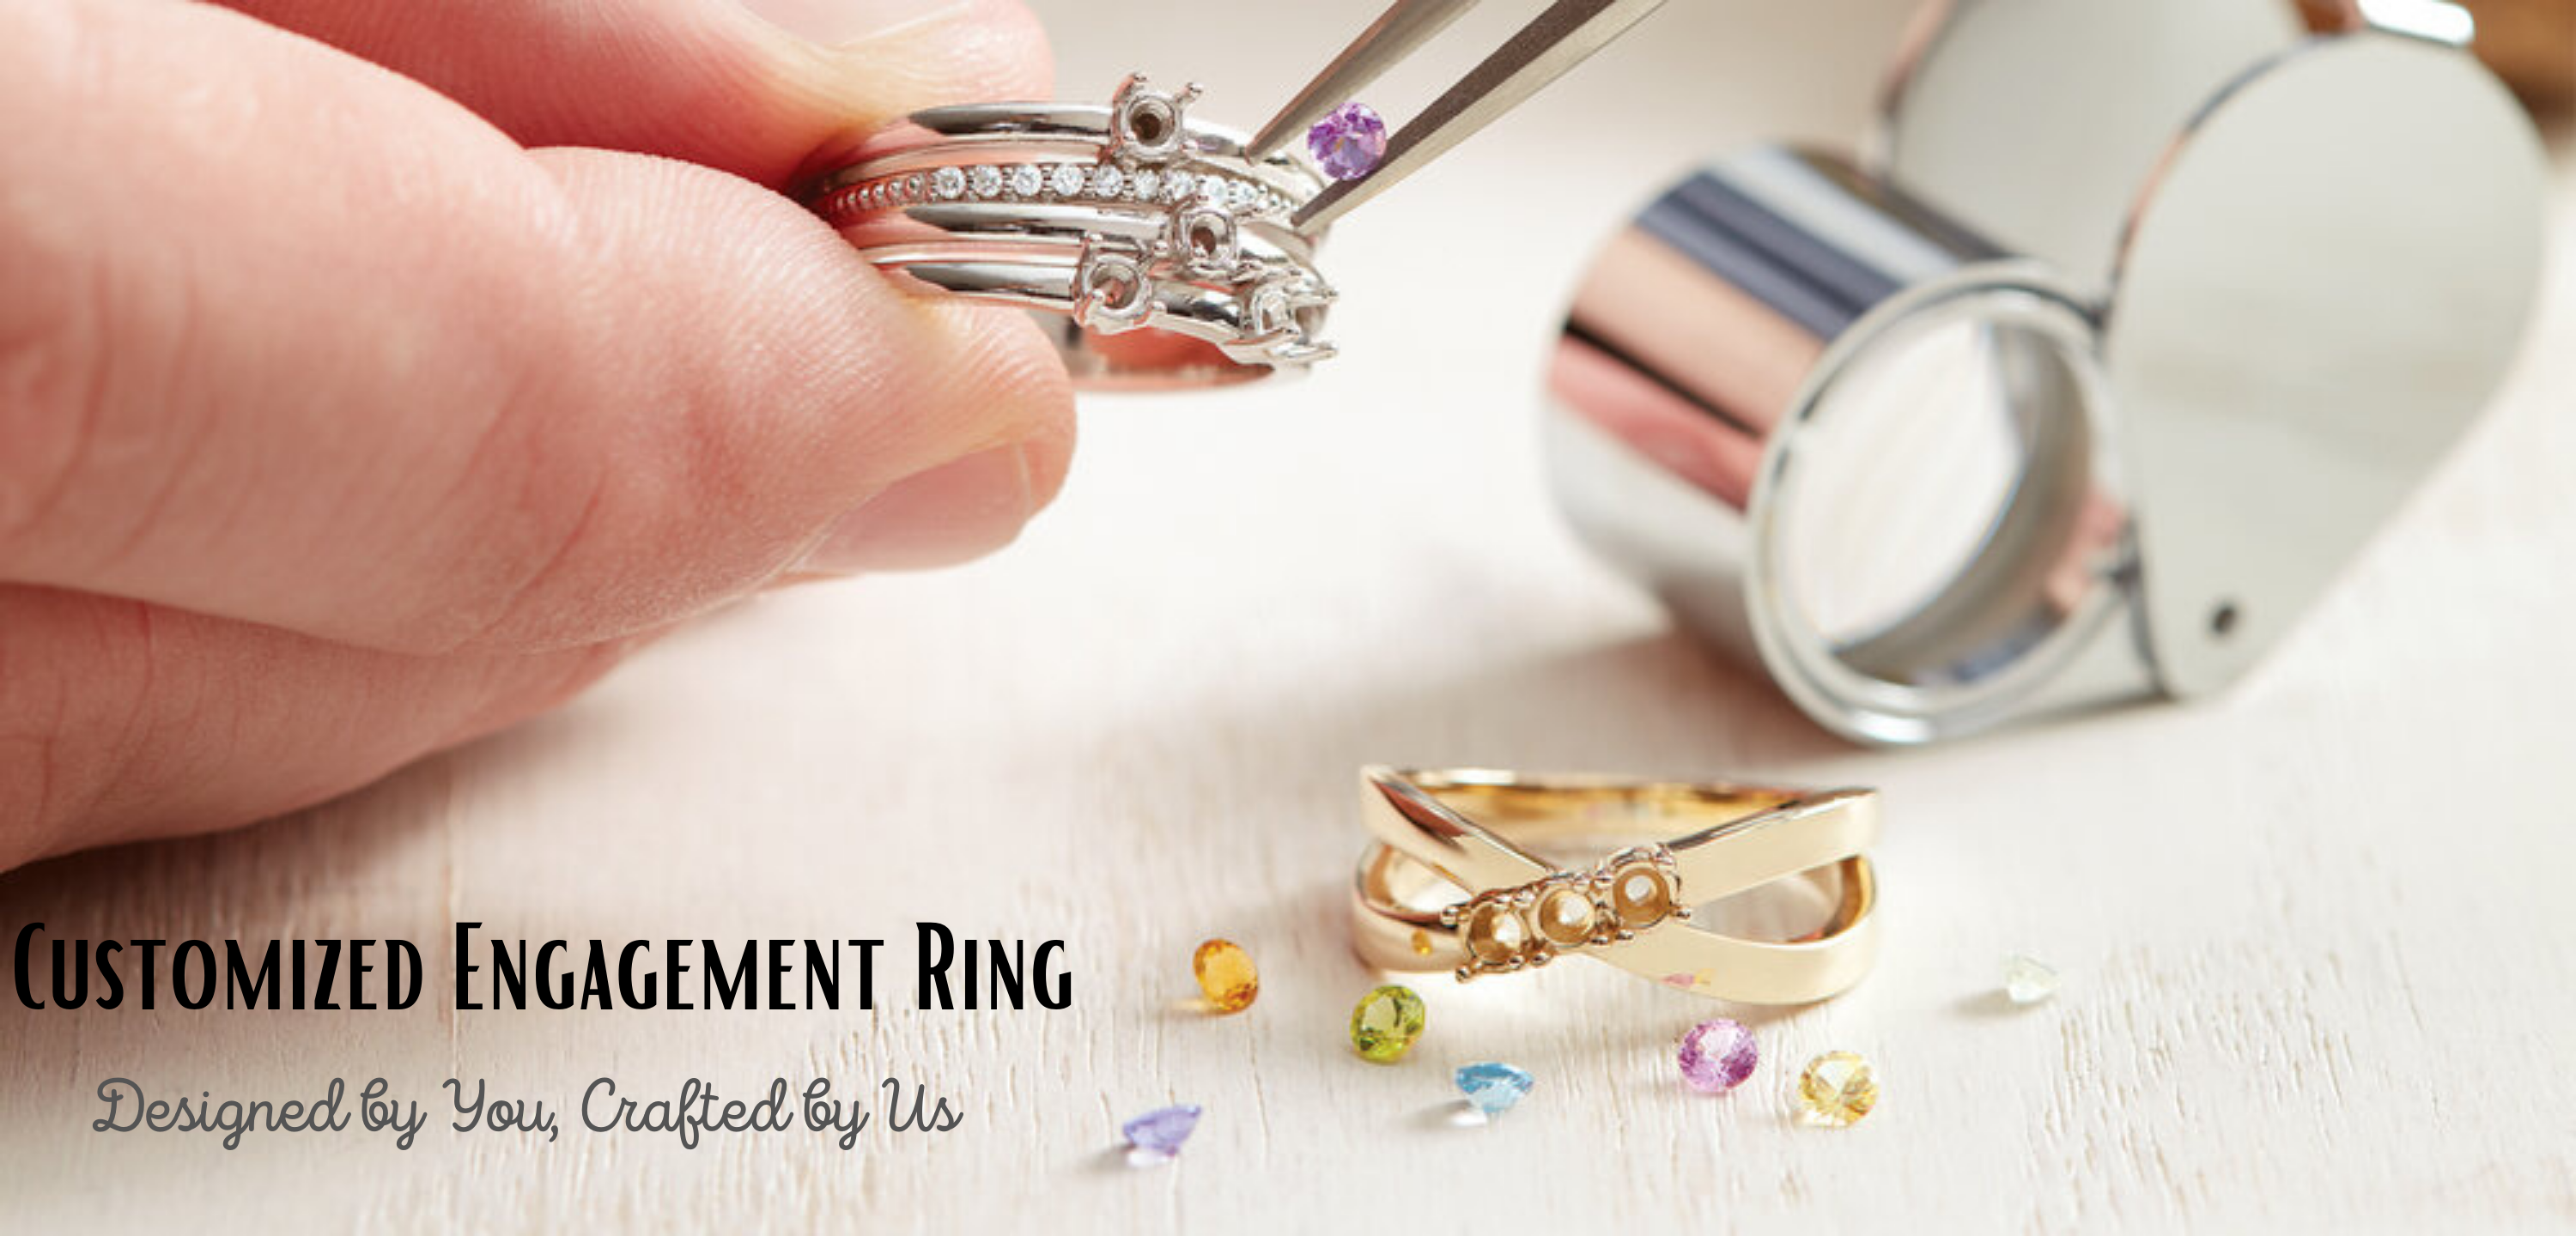 The Unique Customized Engagement Ring Ideas